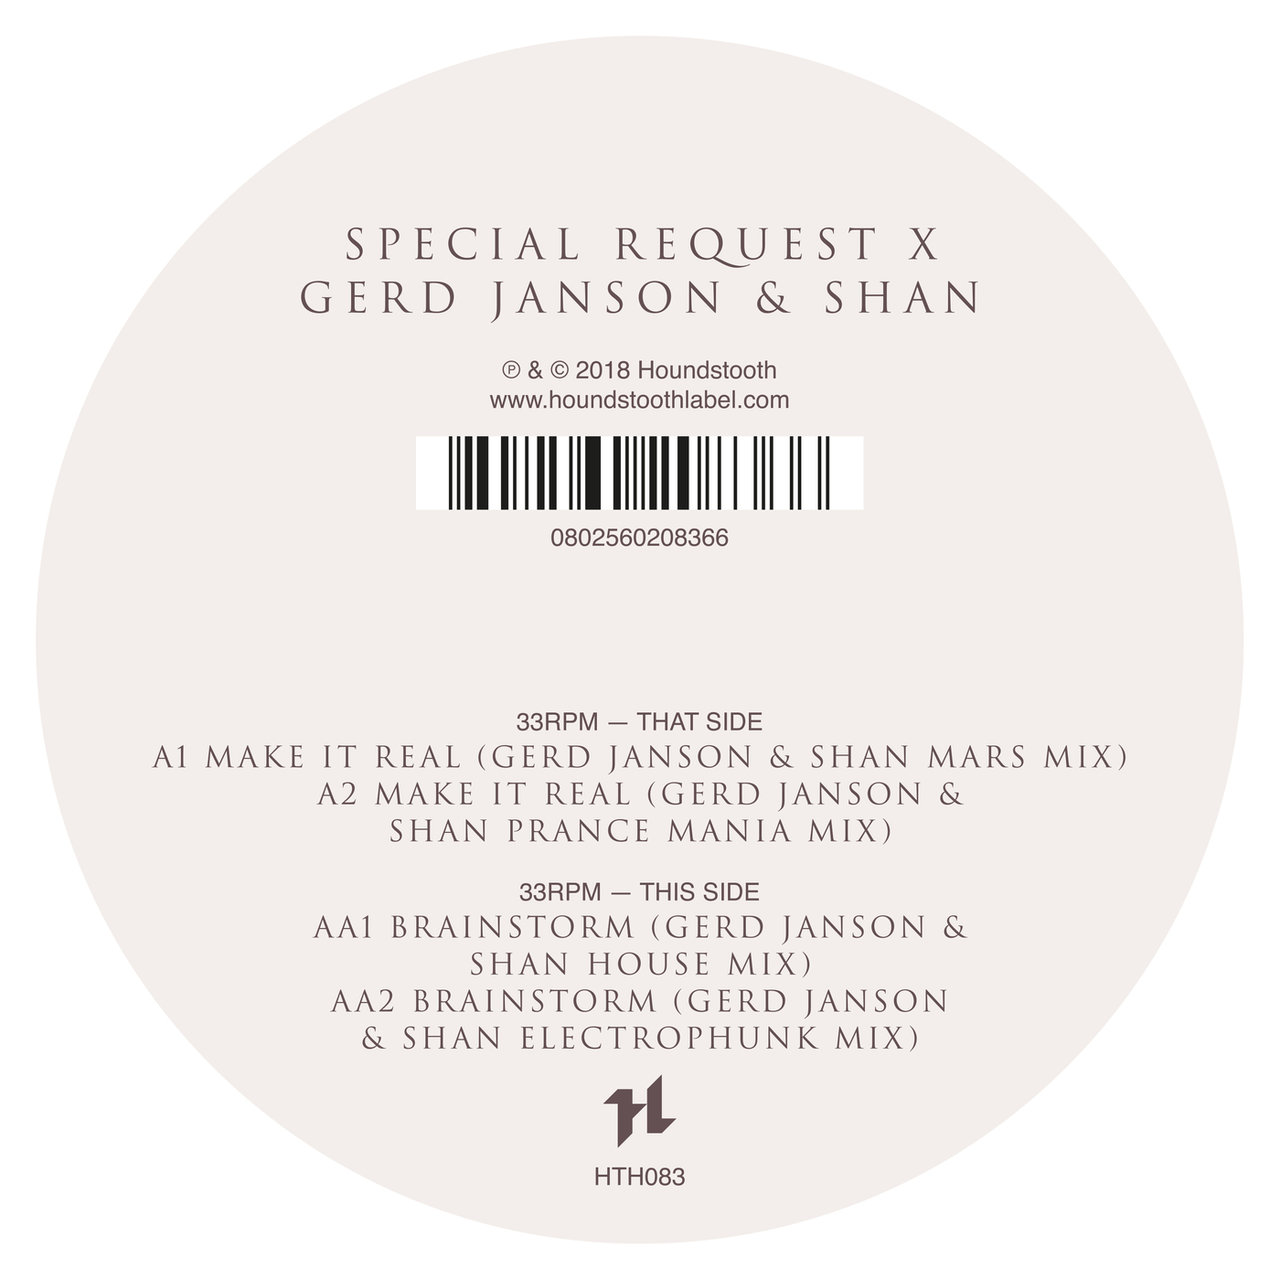 image cover: Special Request, Gerd Janson & Shan - Special Request X Gerd Janson & Shan / Houndstooth